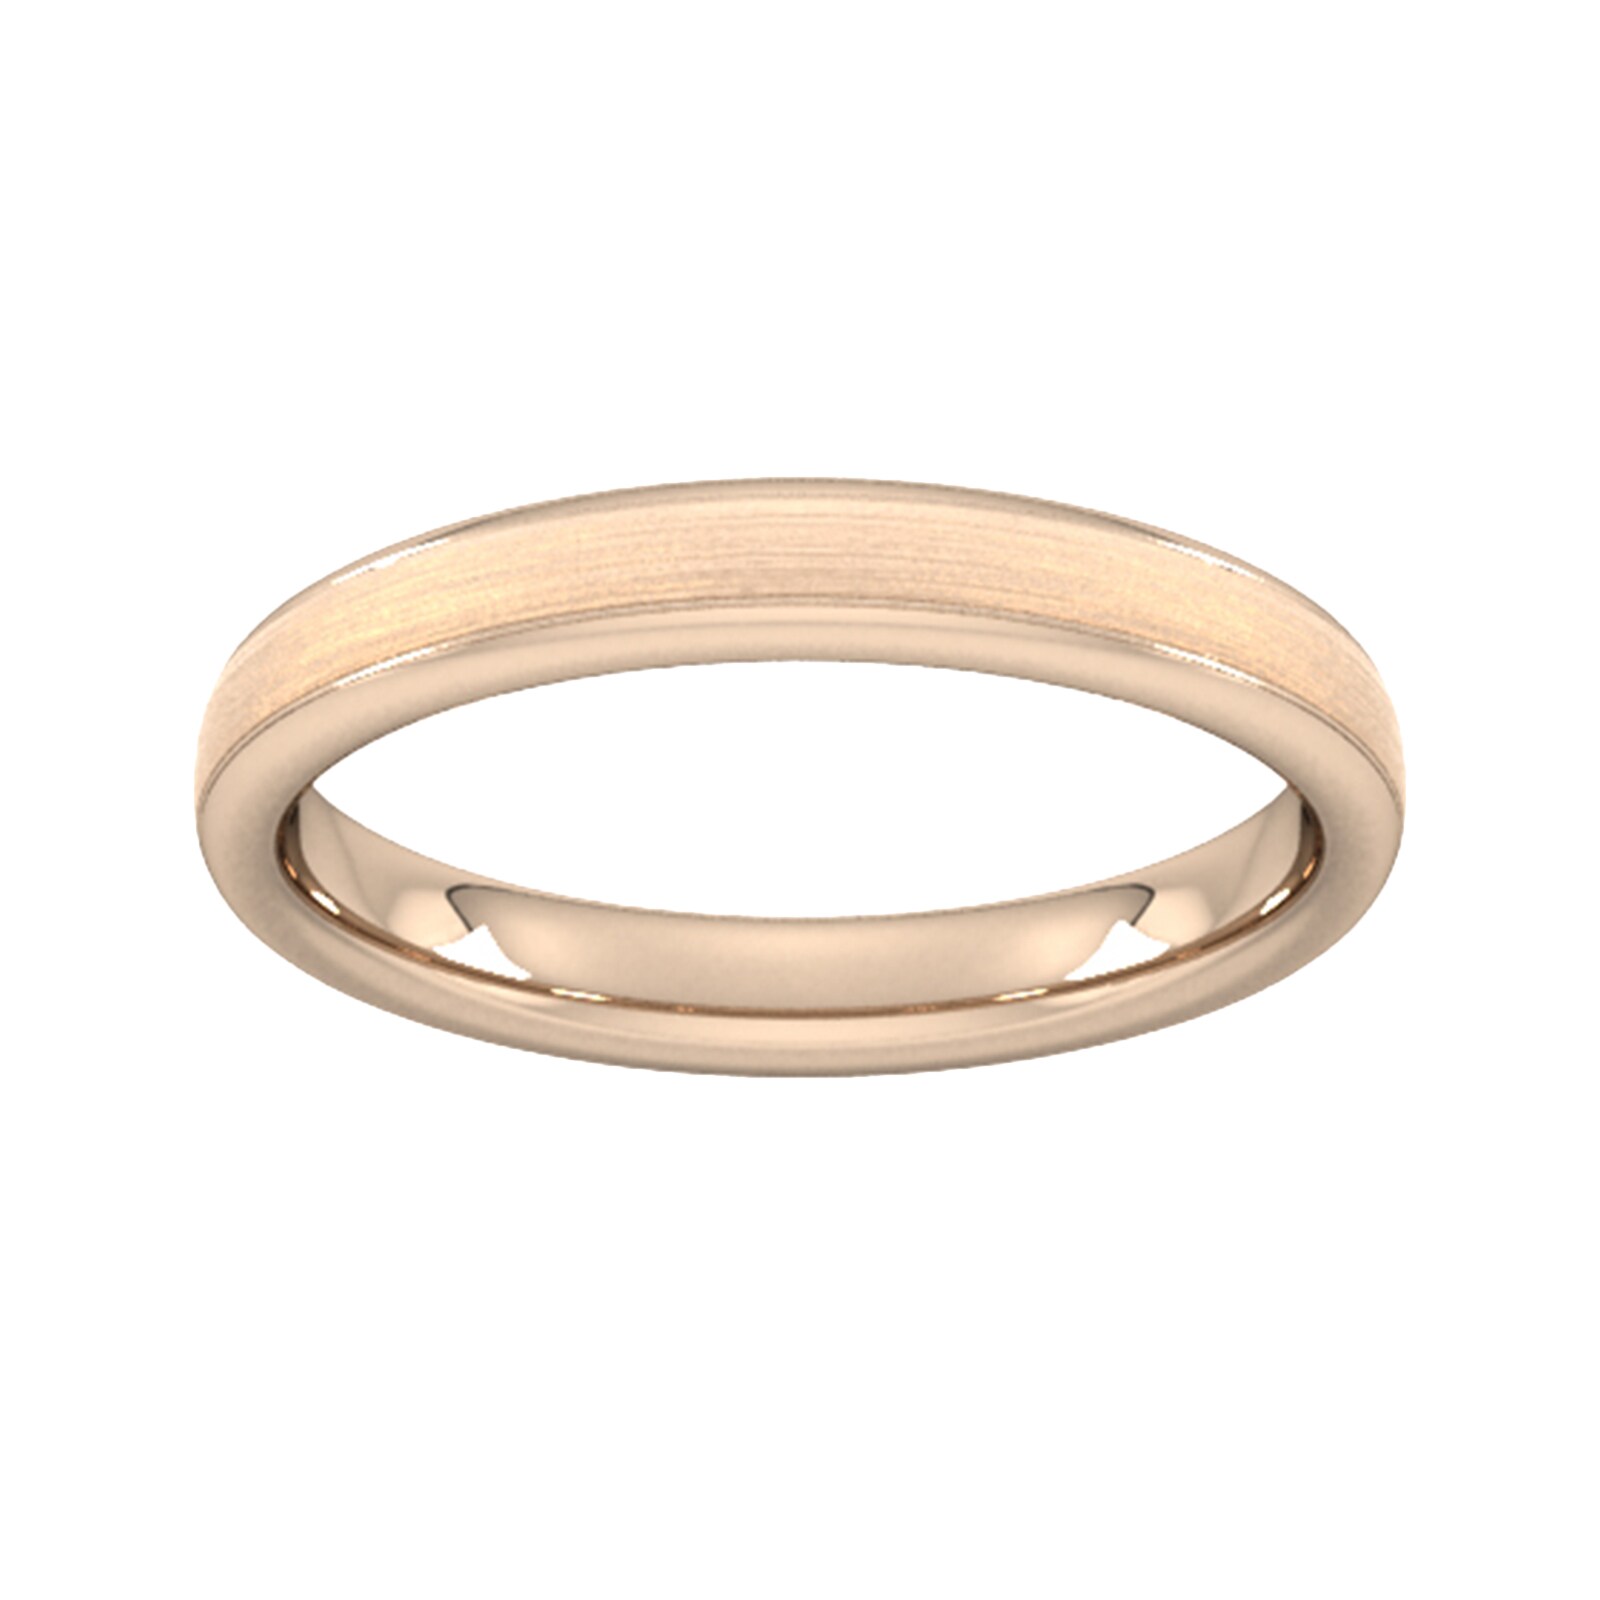 3mm Traditional Court Standard Matt Centre With Grooves Wedding Ring In 18 Carat Rose Gold - Ring Size O